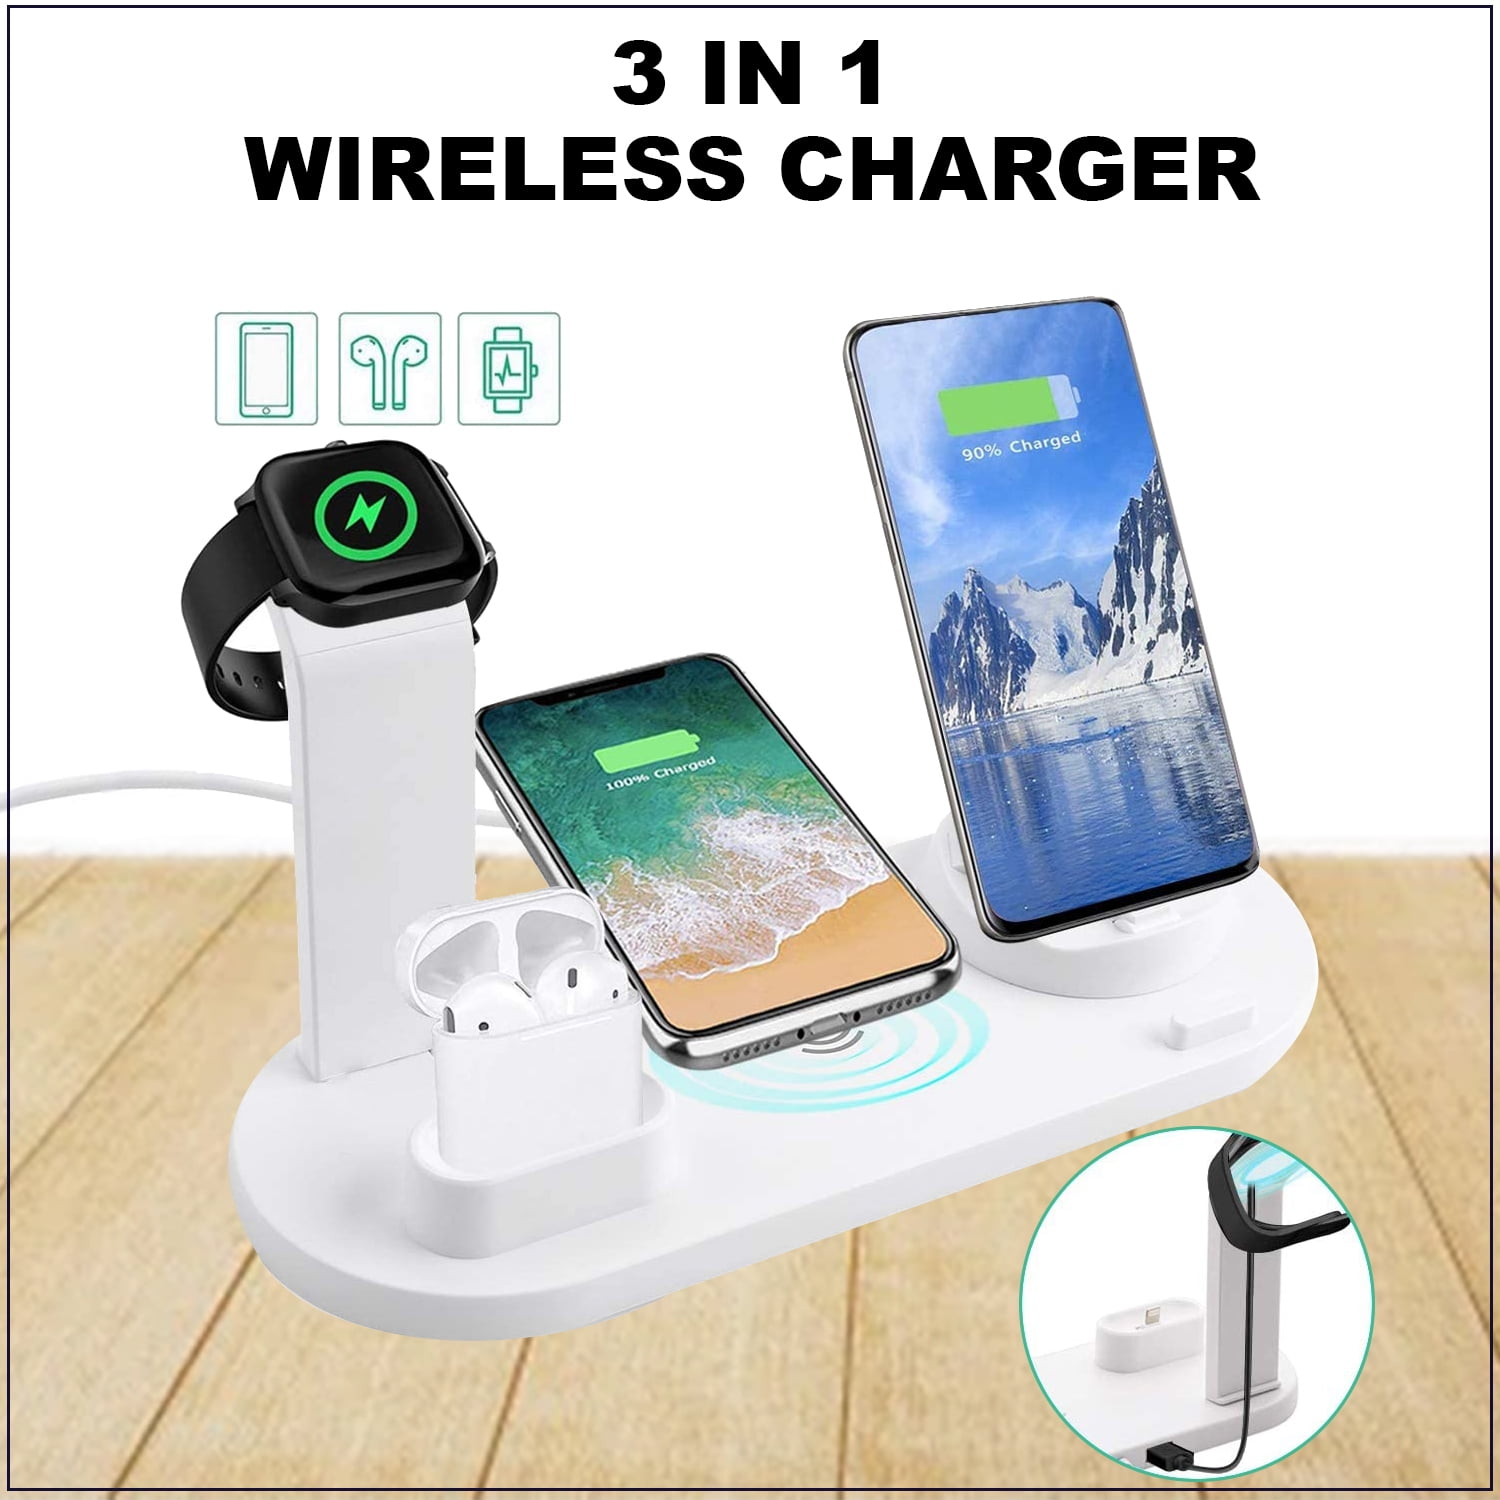 iphi e wireless charger